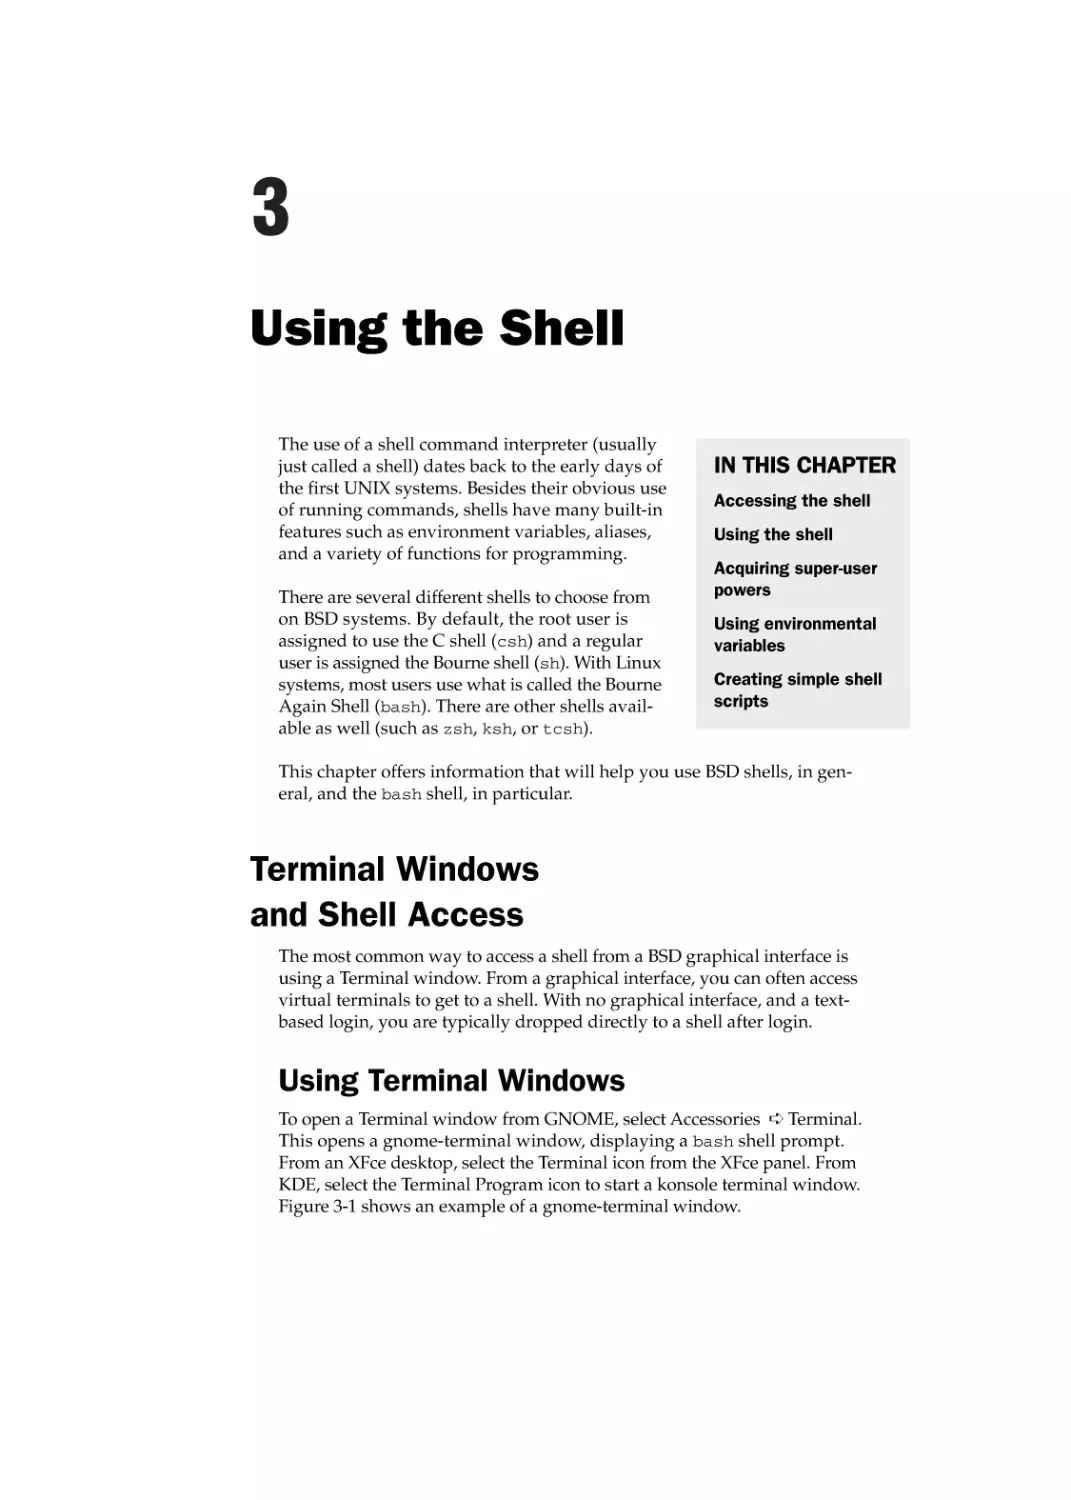 Chapter 3
Terminal Windows and Shell Access